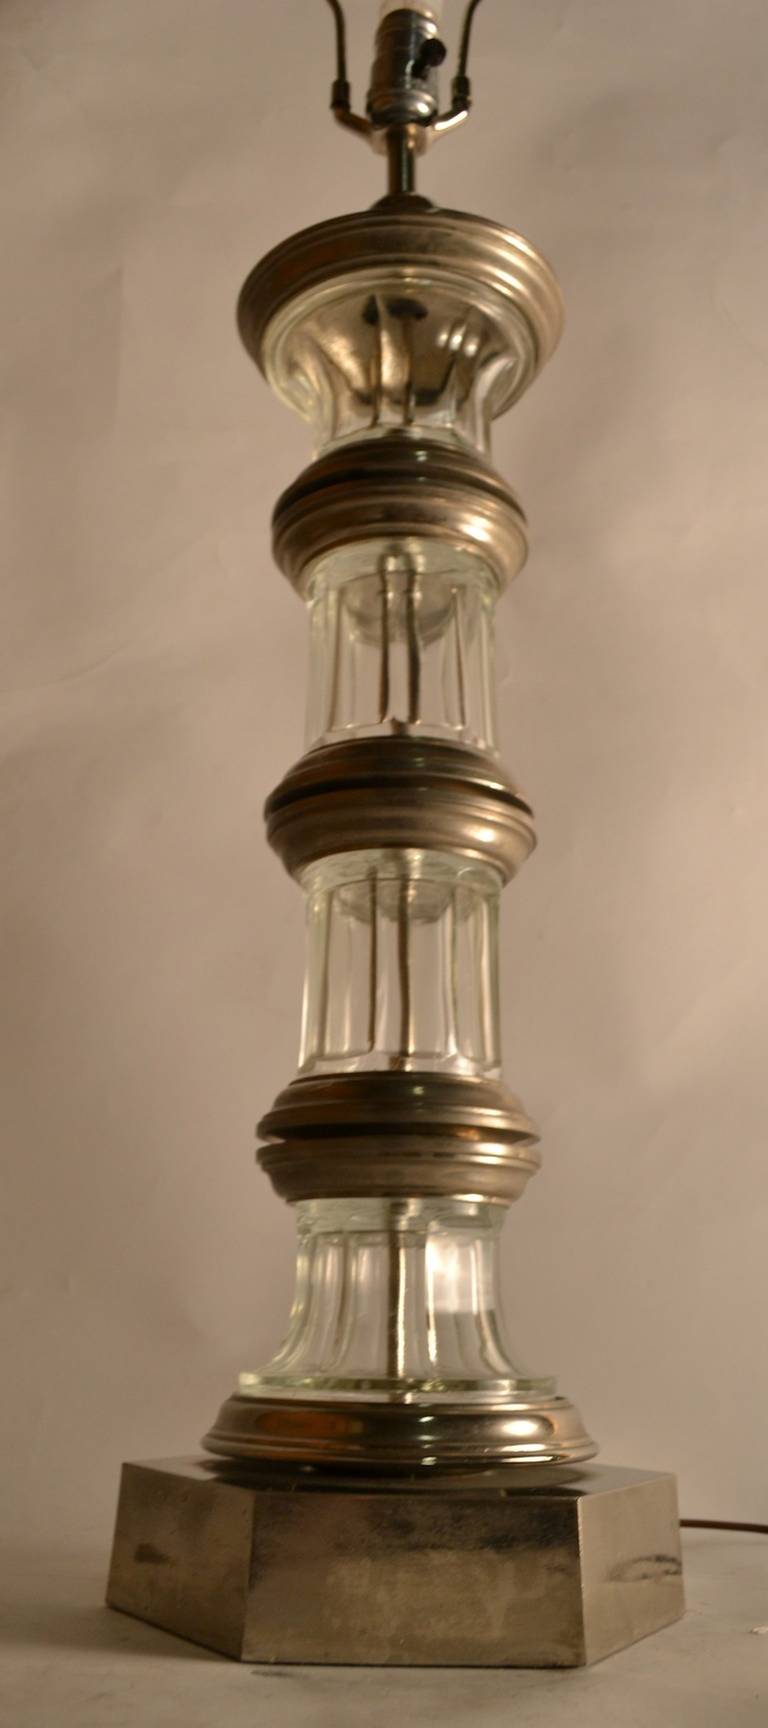 Silver and glass column lamp attributed to Paul Hanson. Elegant style and fine quality. Original shade available, but as is.